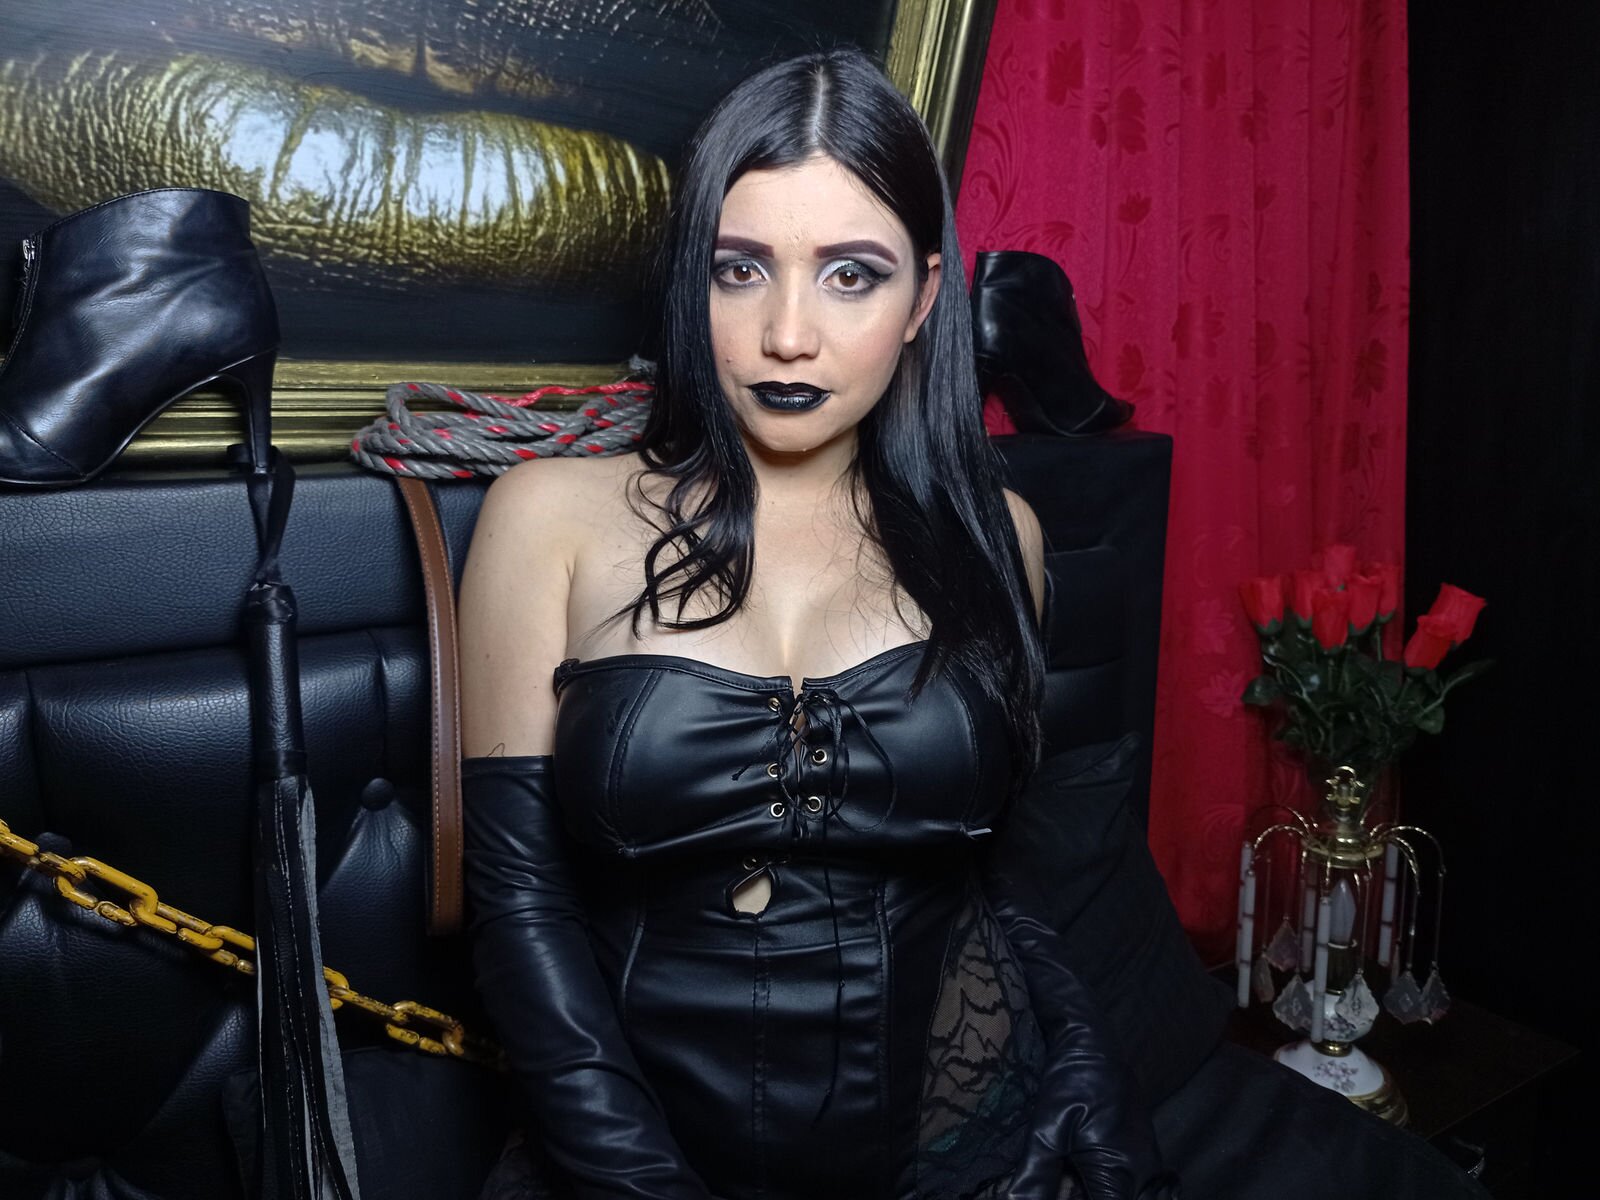 Free Live Sex Chat With VictoriaBlun